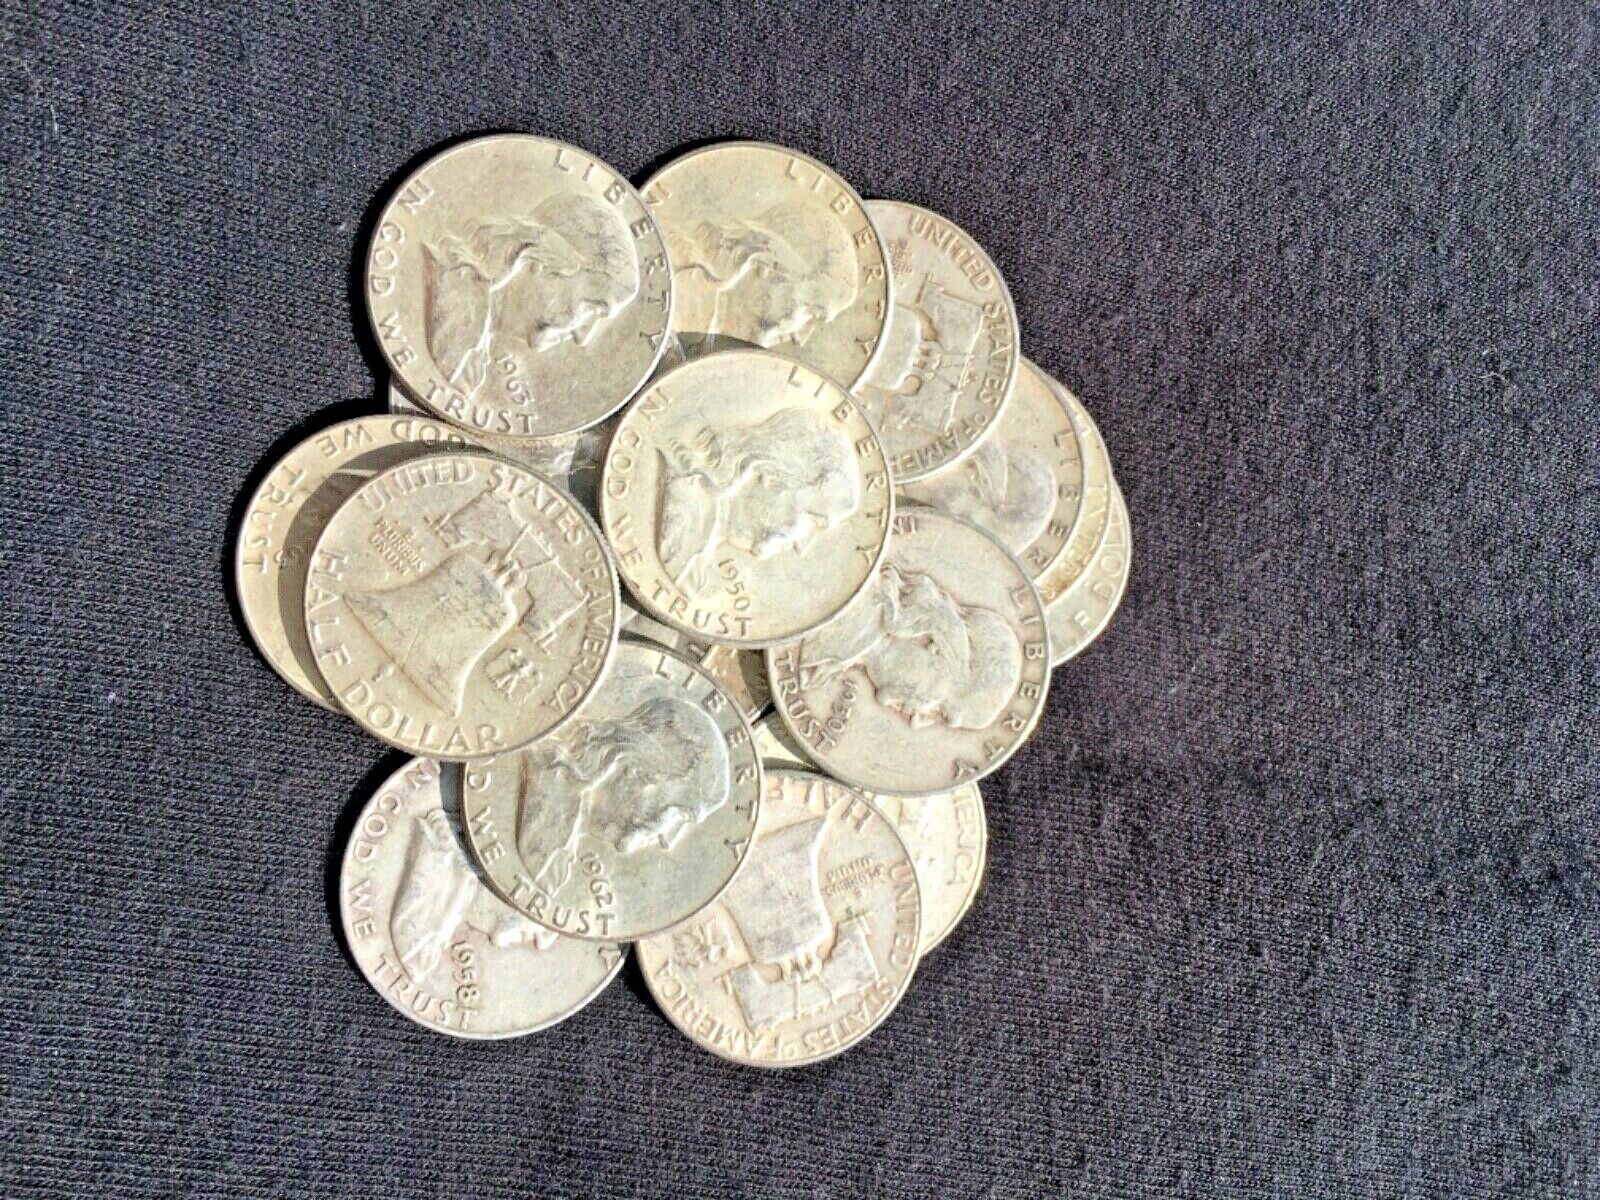 THE FRANKLIN DEAL All 90% Lot Old US Junk Silver Coin $4.50  4 OZ. 1964 ONE 